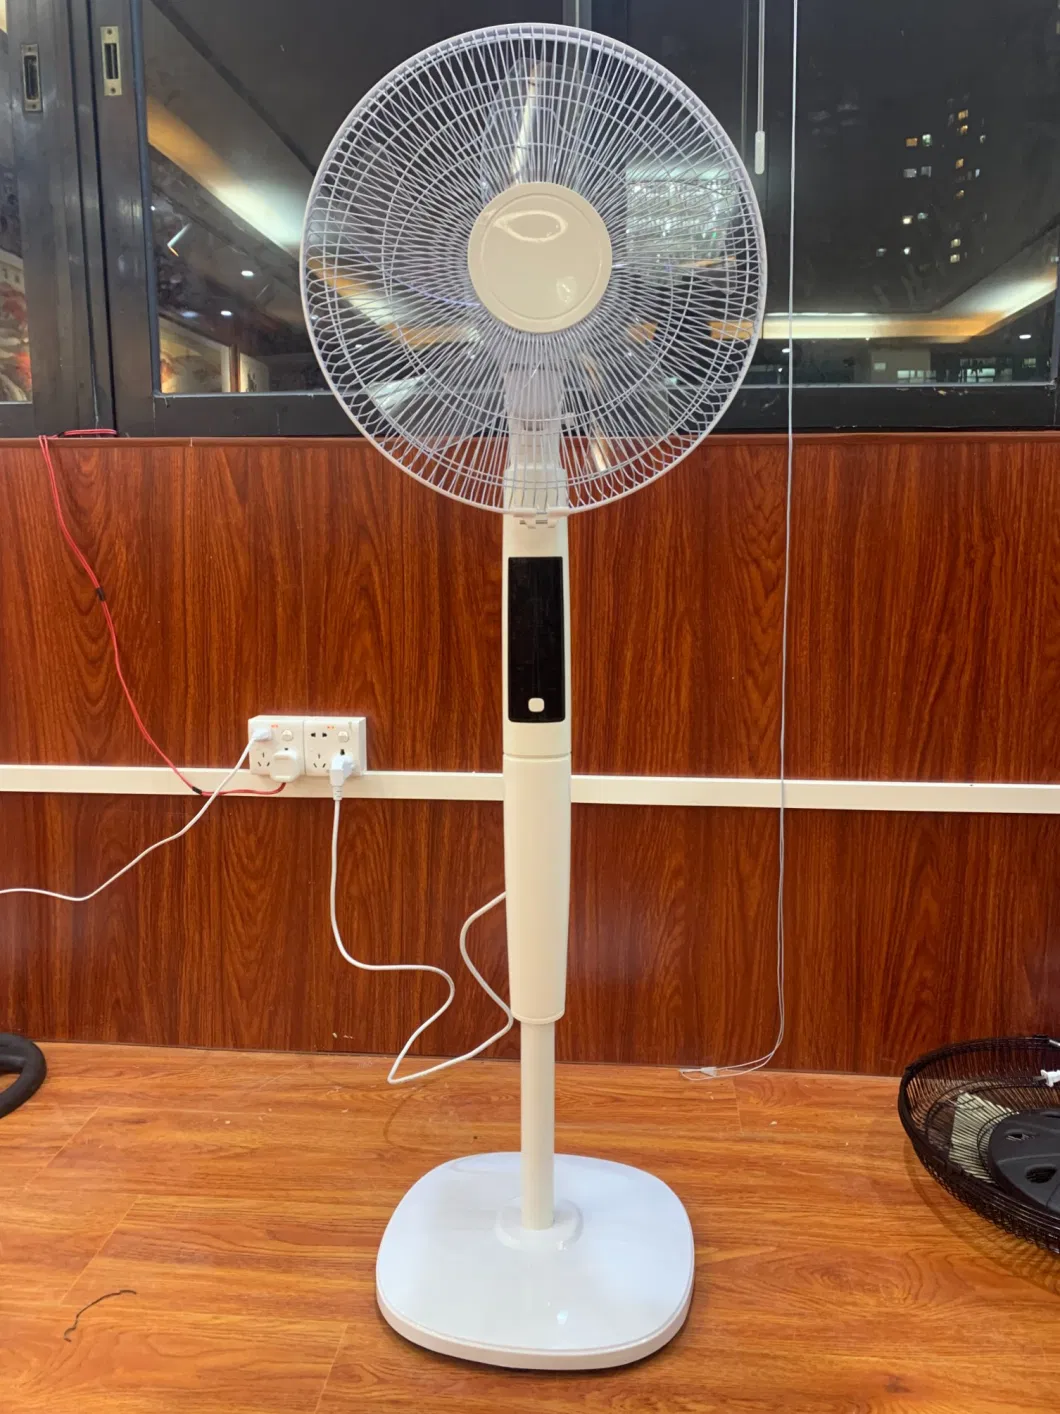 Wholesale Price Industrial High Speed 16 Inch 5 PP Blades 2 in 1 Floor Stand Fan with Remote Control